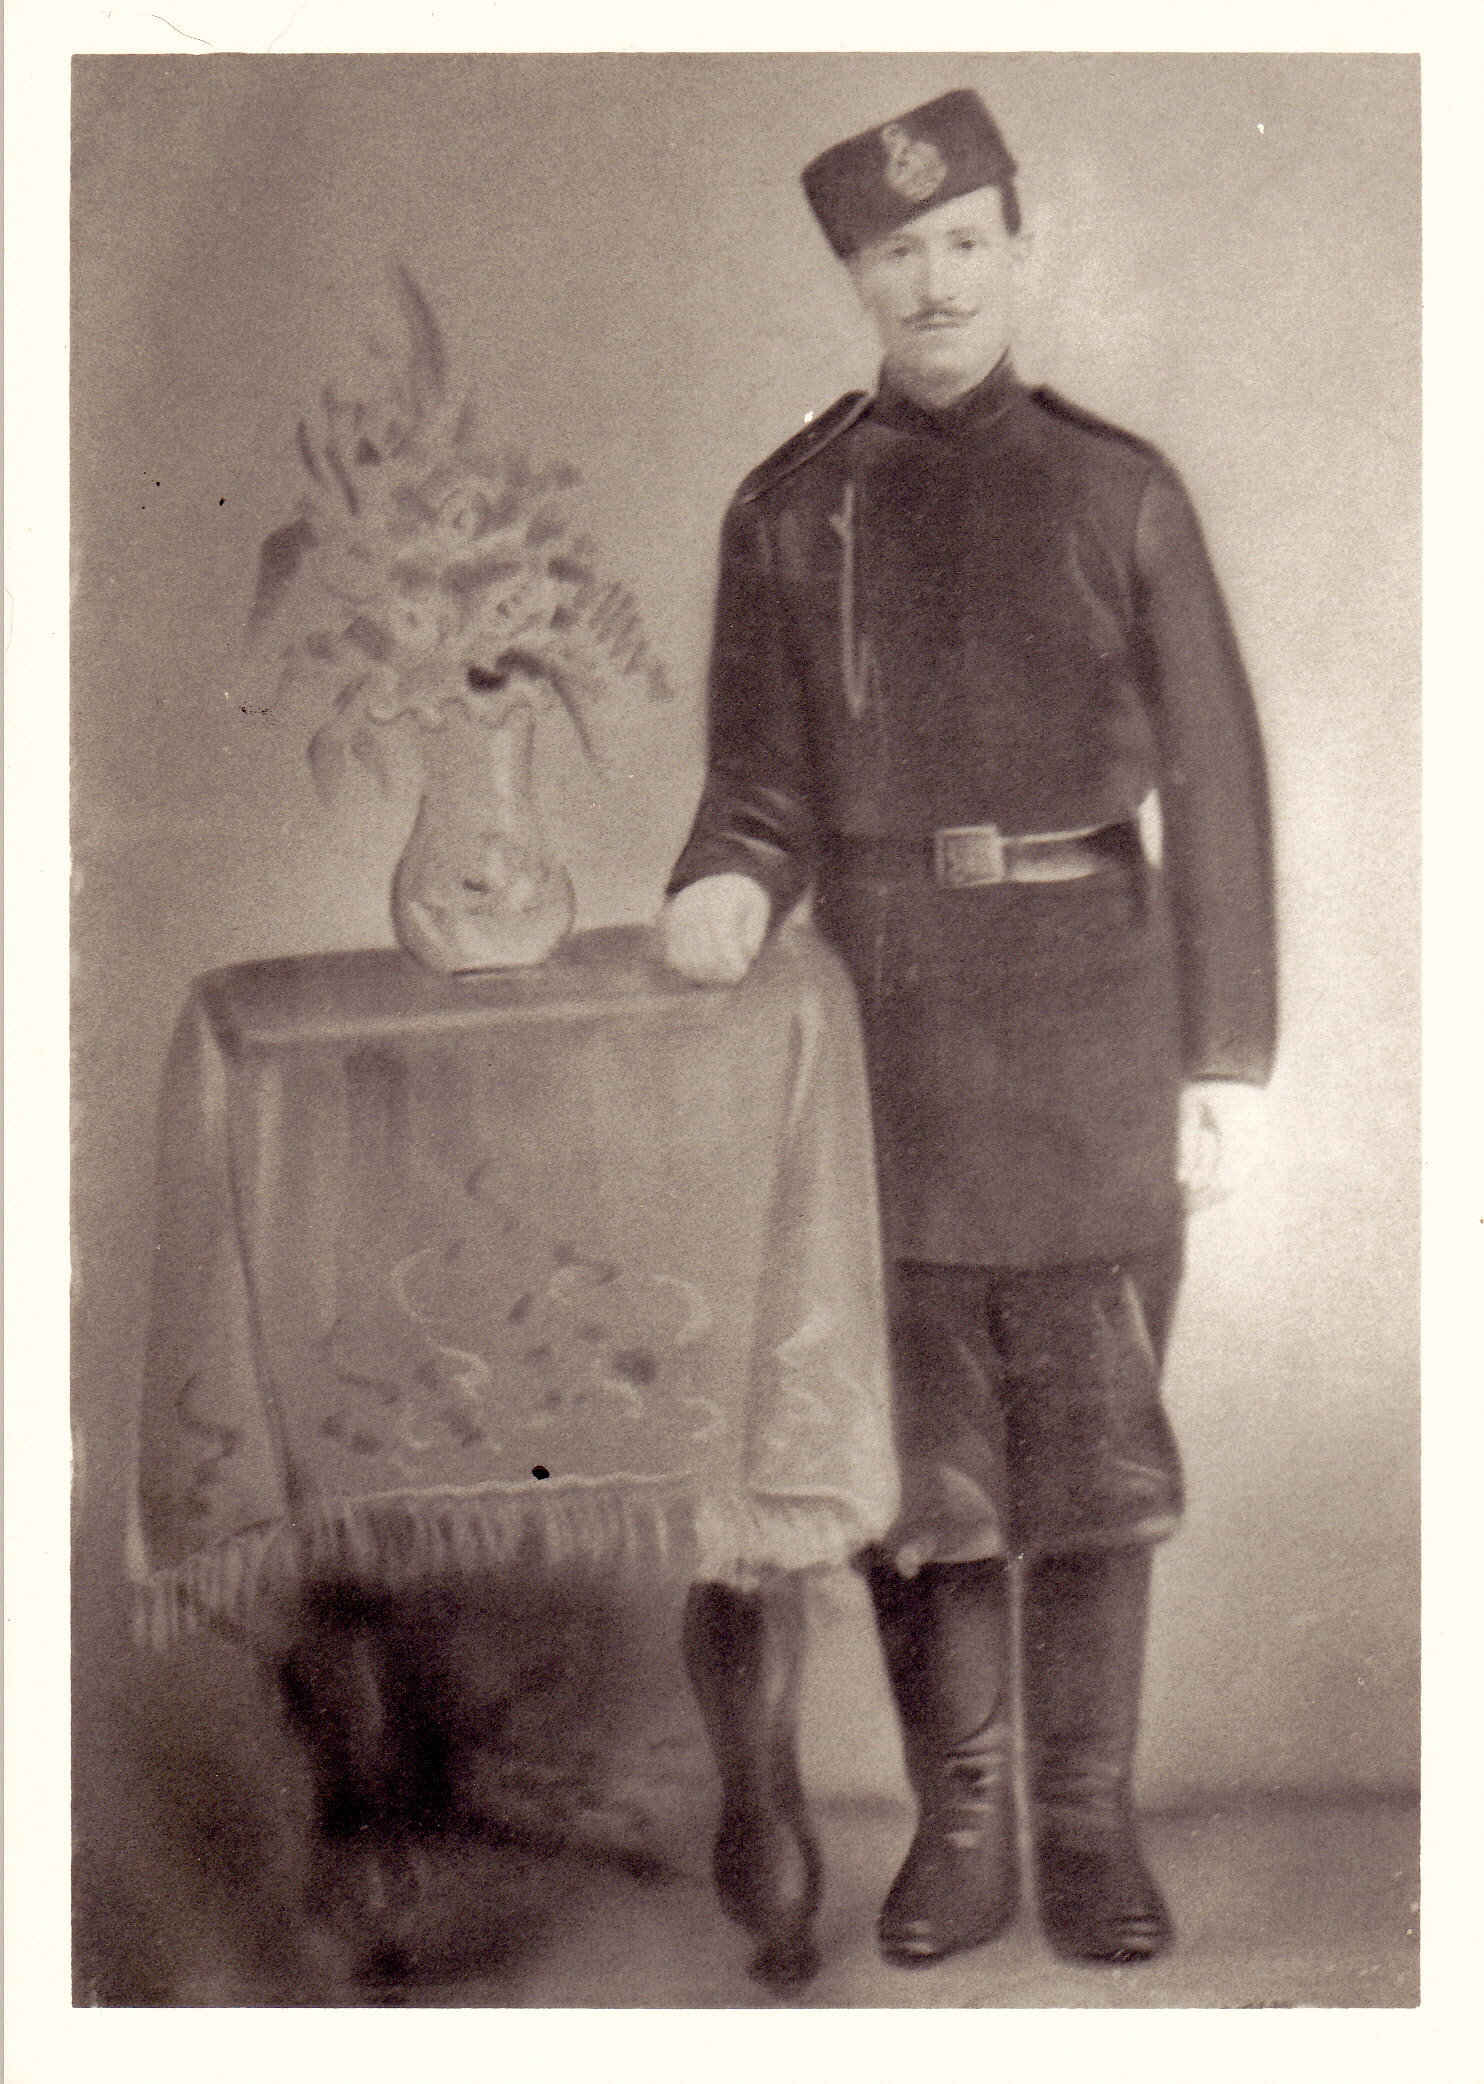 Photograph of Georg Dahmer in military uniform. Georg was born in Beideck. Photograph courtesy of Michelle Reynolds.